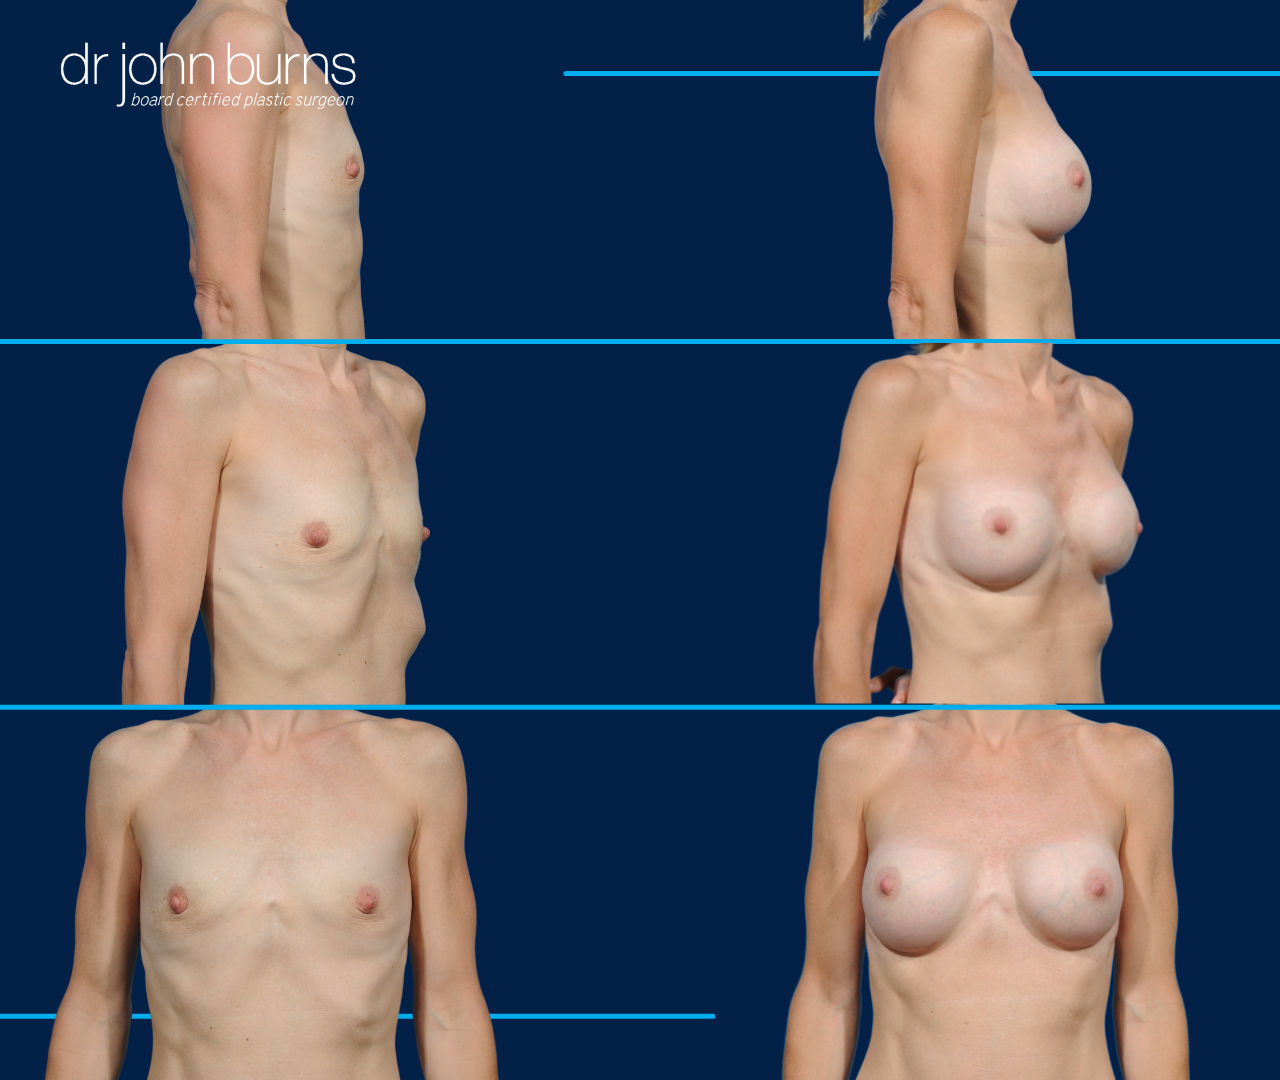 235cc subfascial breast augmentation results by Dr. John Burns